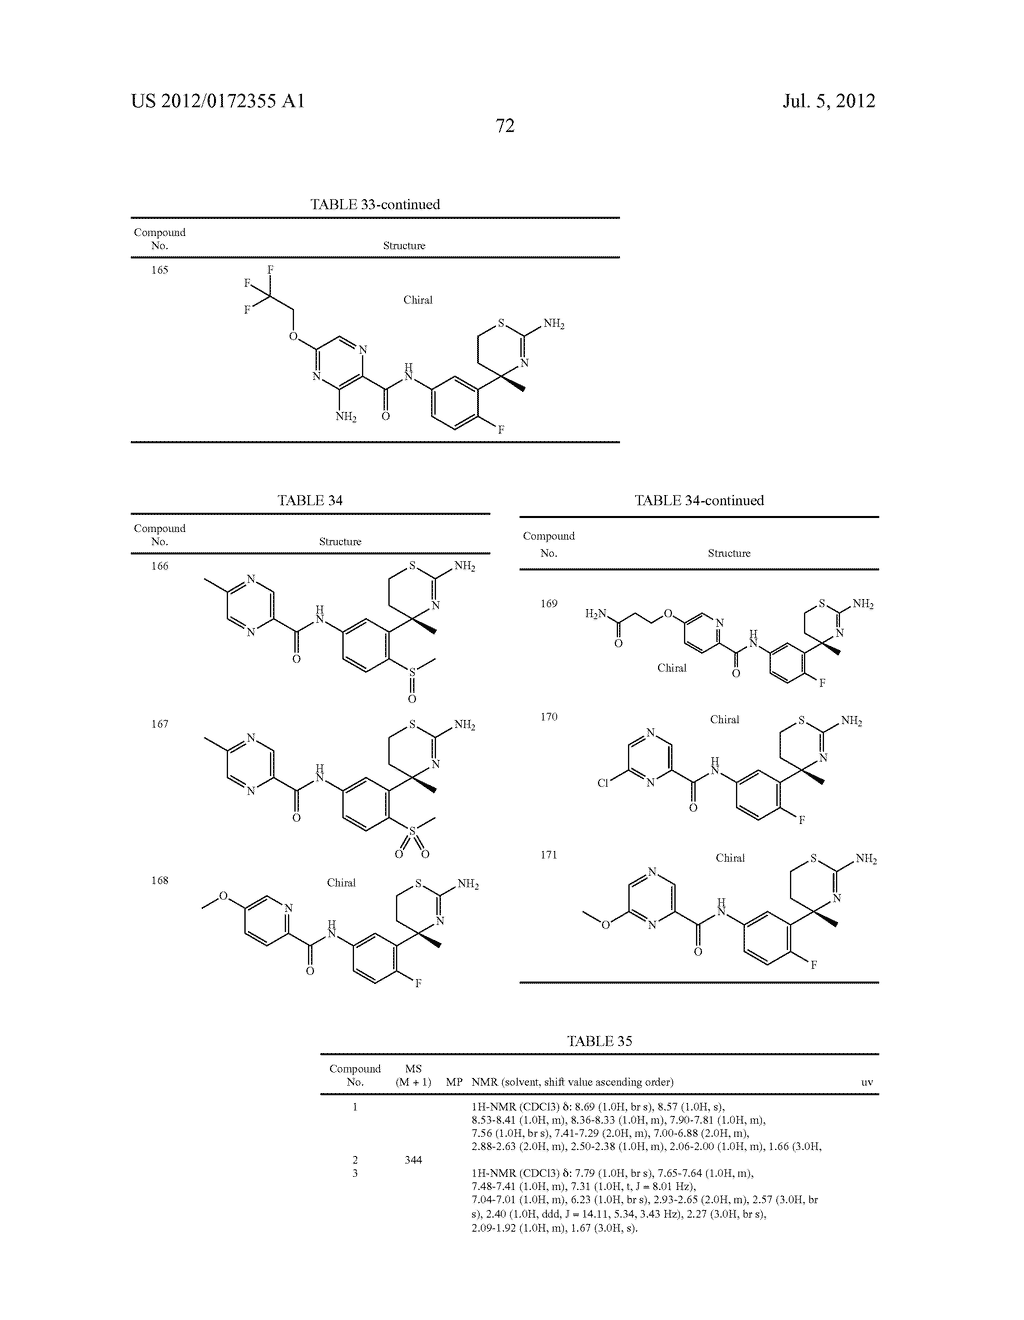 AMINODIHYDROTHIAZINE DERIVATIVES SUBSTITUTED WITH A CYCLIC GROUP - diagram, schematic, and image 73